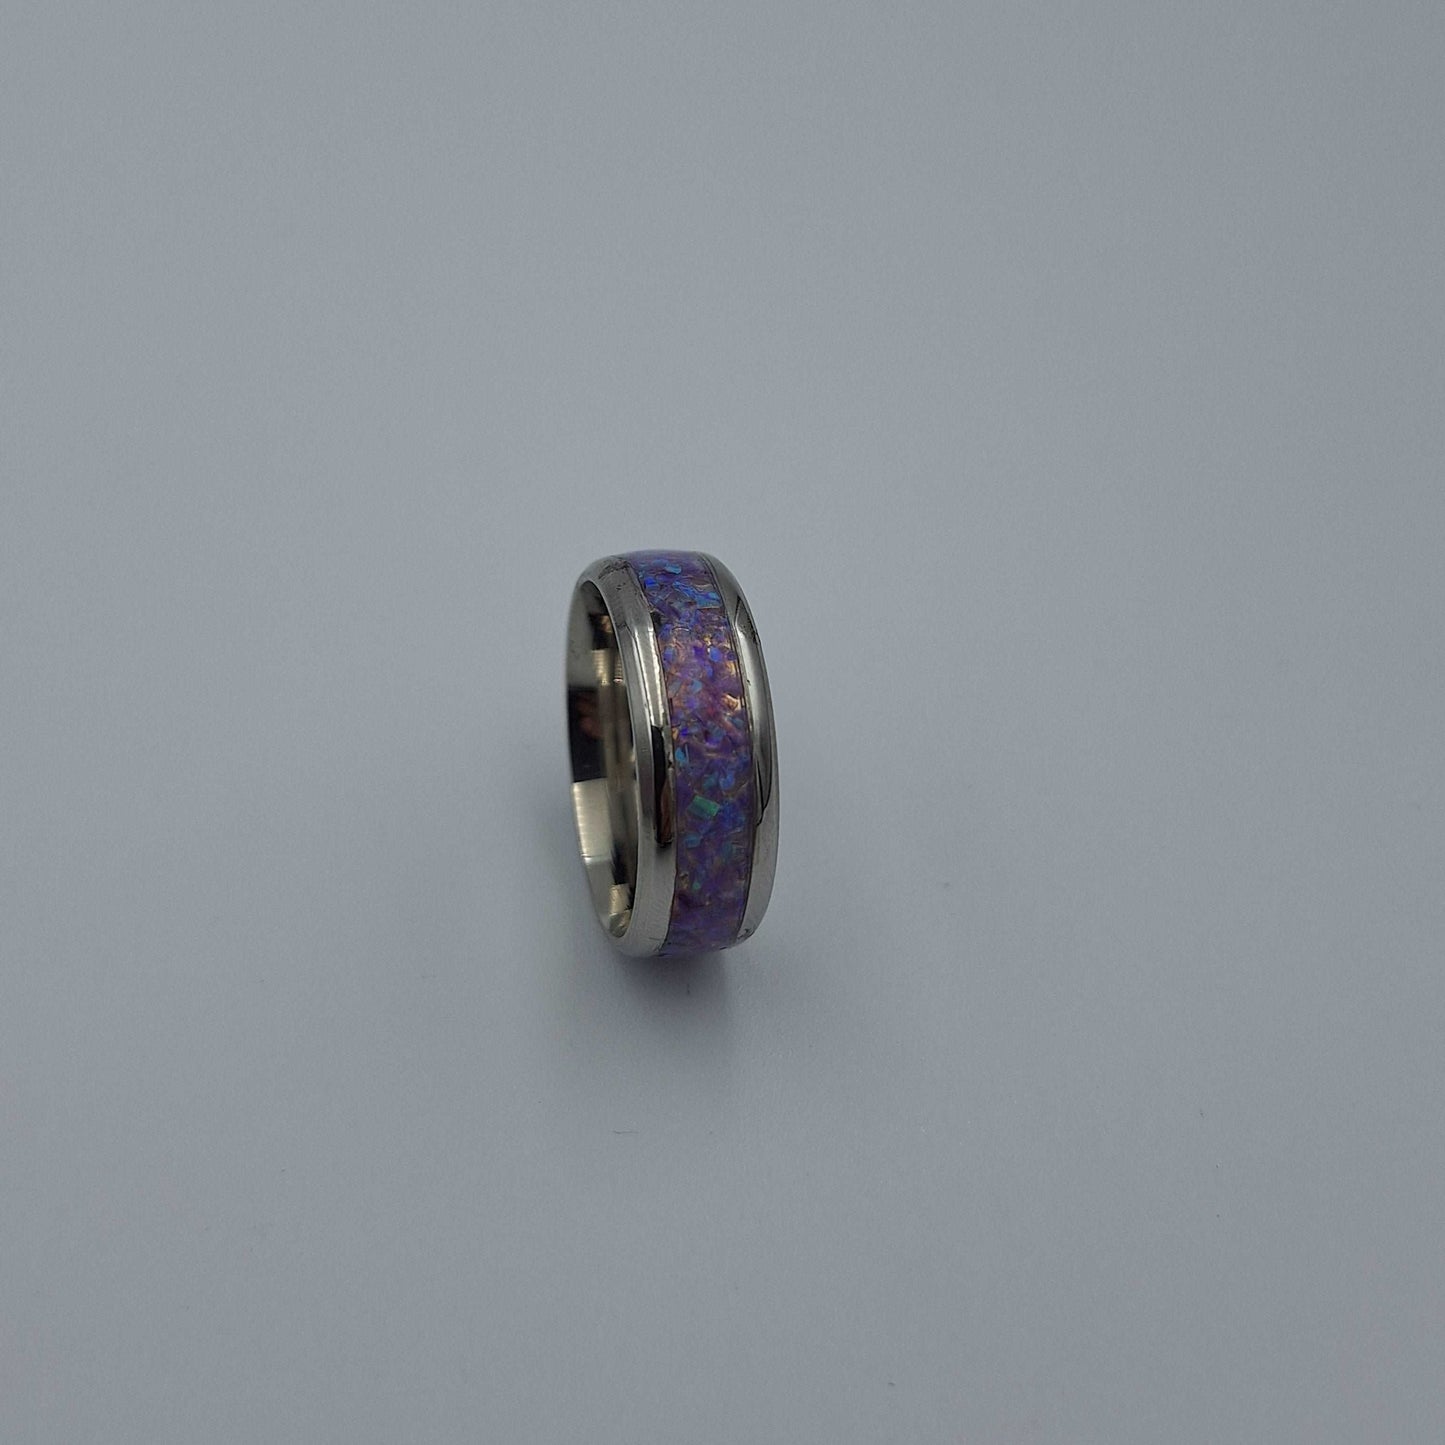 Stainless Steel 8mm Ring With Crushed Opals - Size 10